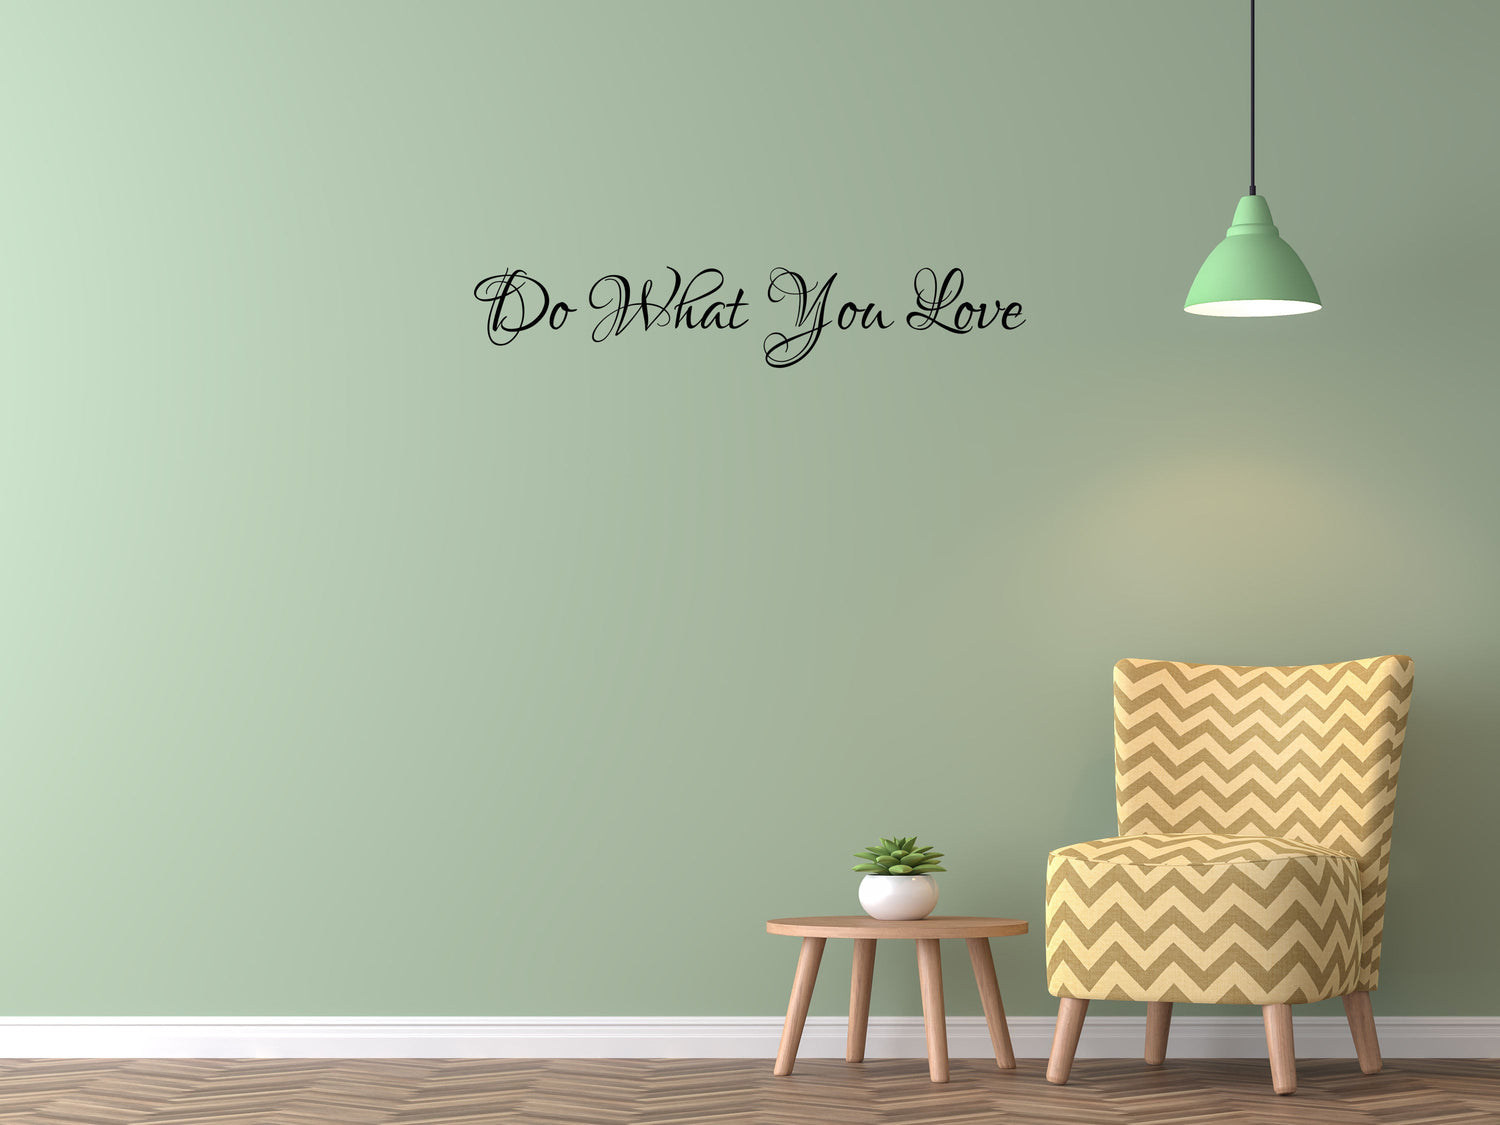 Do What You Love Wall Sticker Quotes - Romance Decal- Inspirational Wall Decals Vinyl Wall Decal Inspirational Wall Signs 